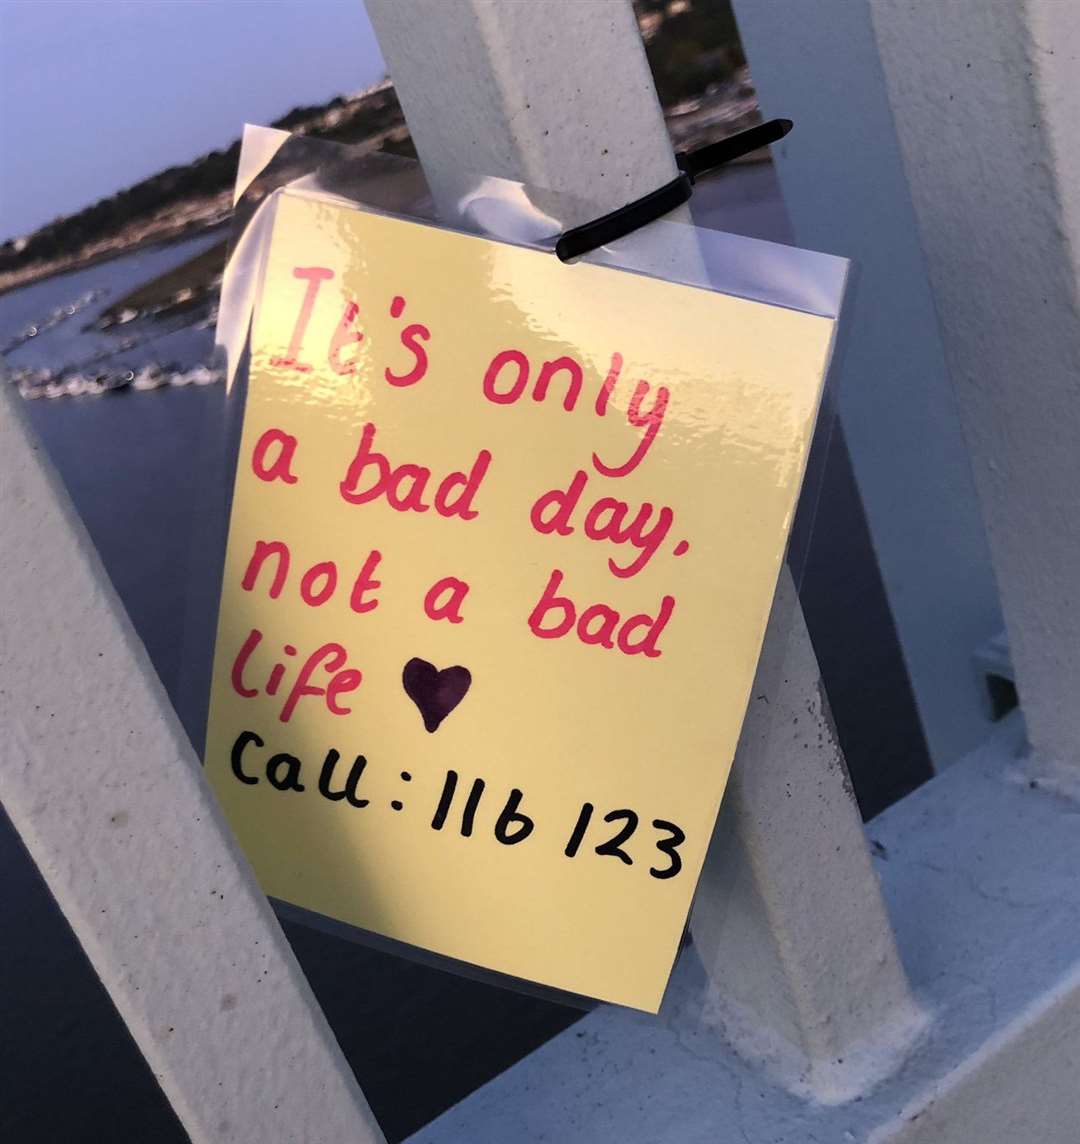 The notes have been left on the bridge. Credit: Lacey Fuller